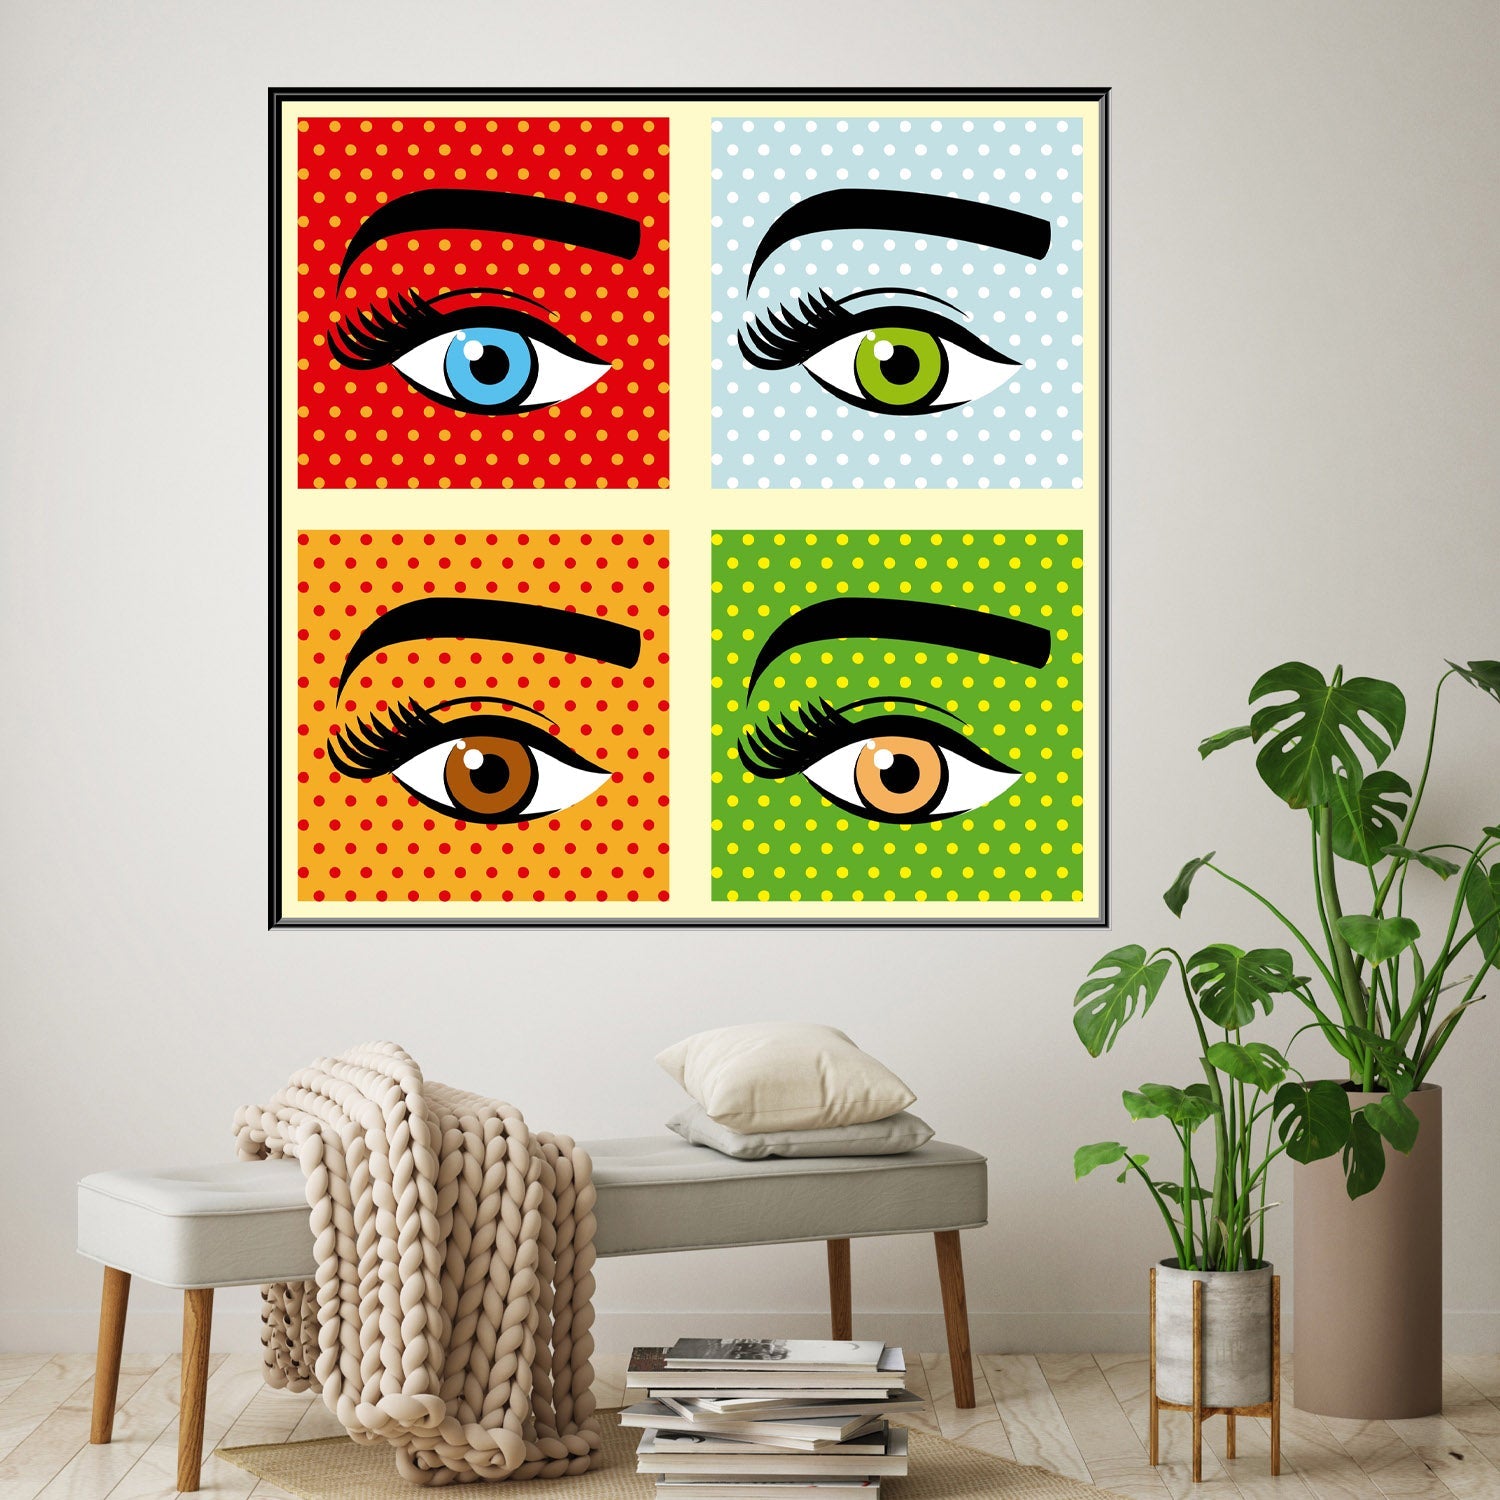 https://cdn.shopify.com/s/files/1/0387/9986/8044/products/EyesonYouCanvasArtprintStretched-4.jpg